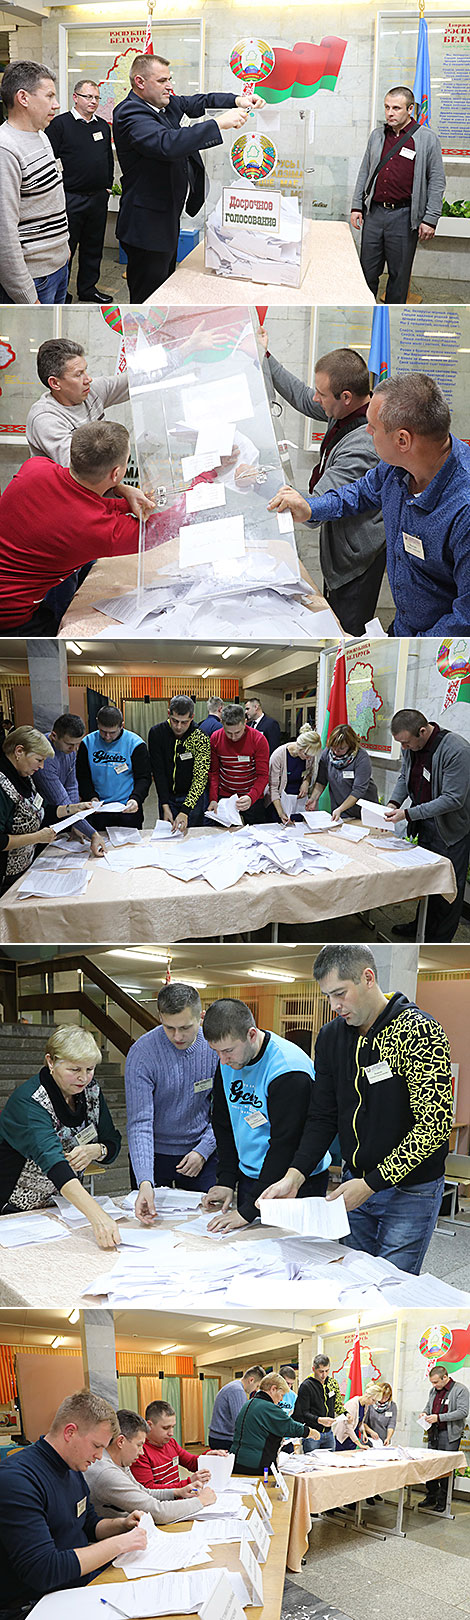 Polling stations close in Belarus as part of parliamentary elections